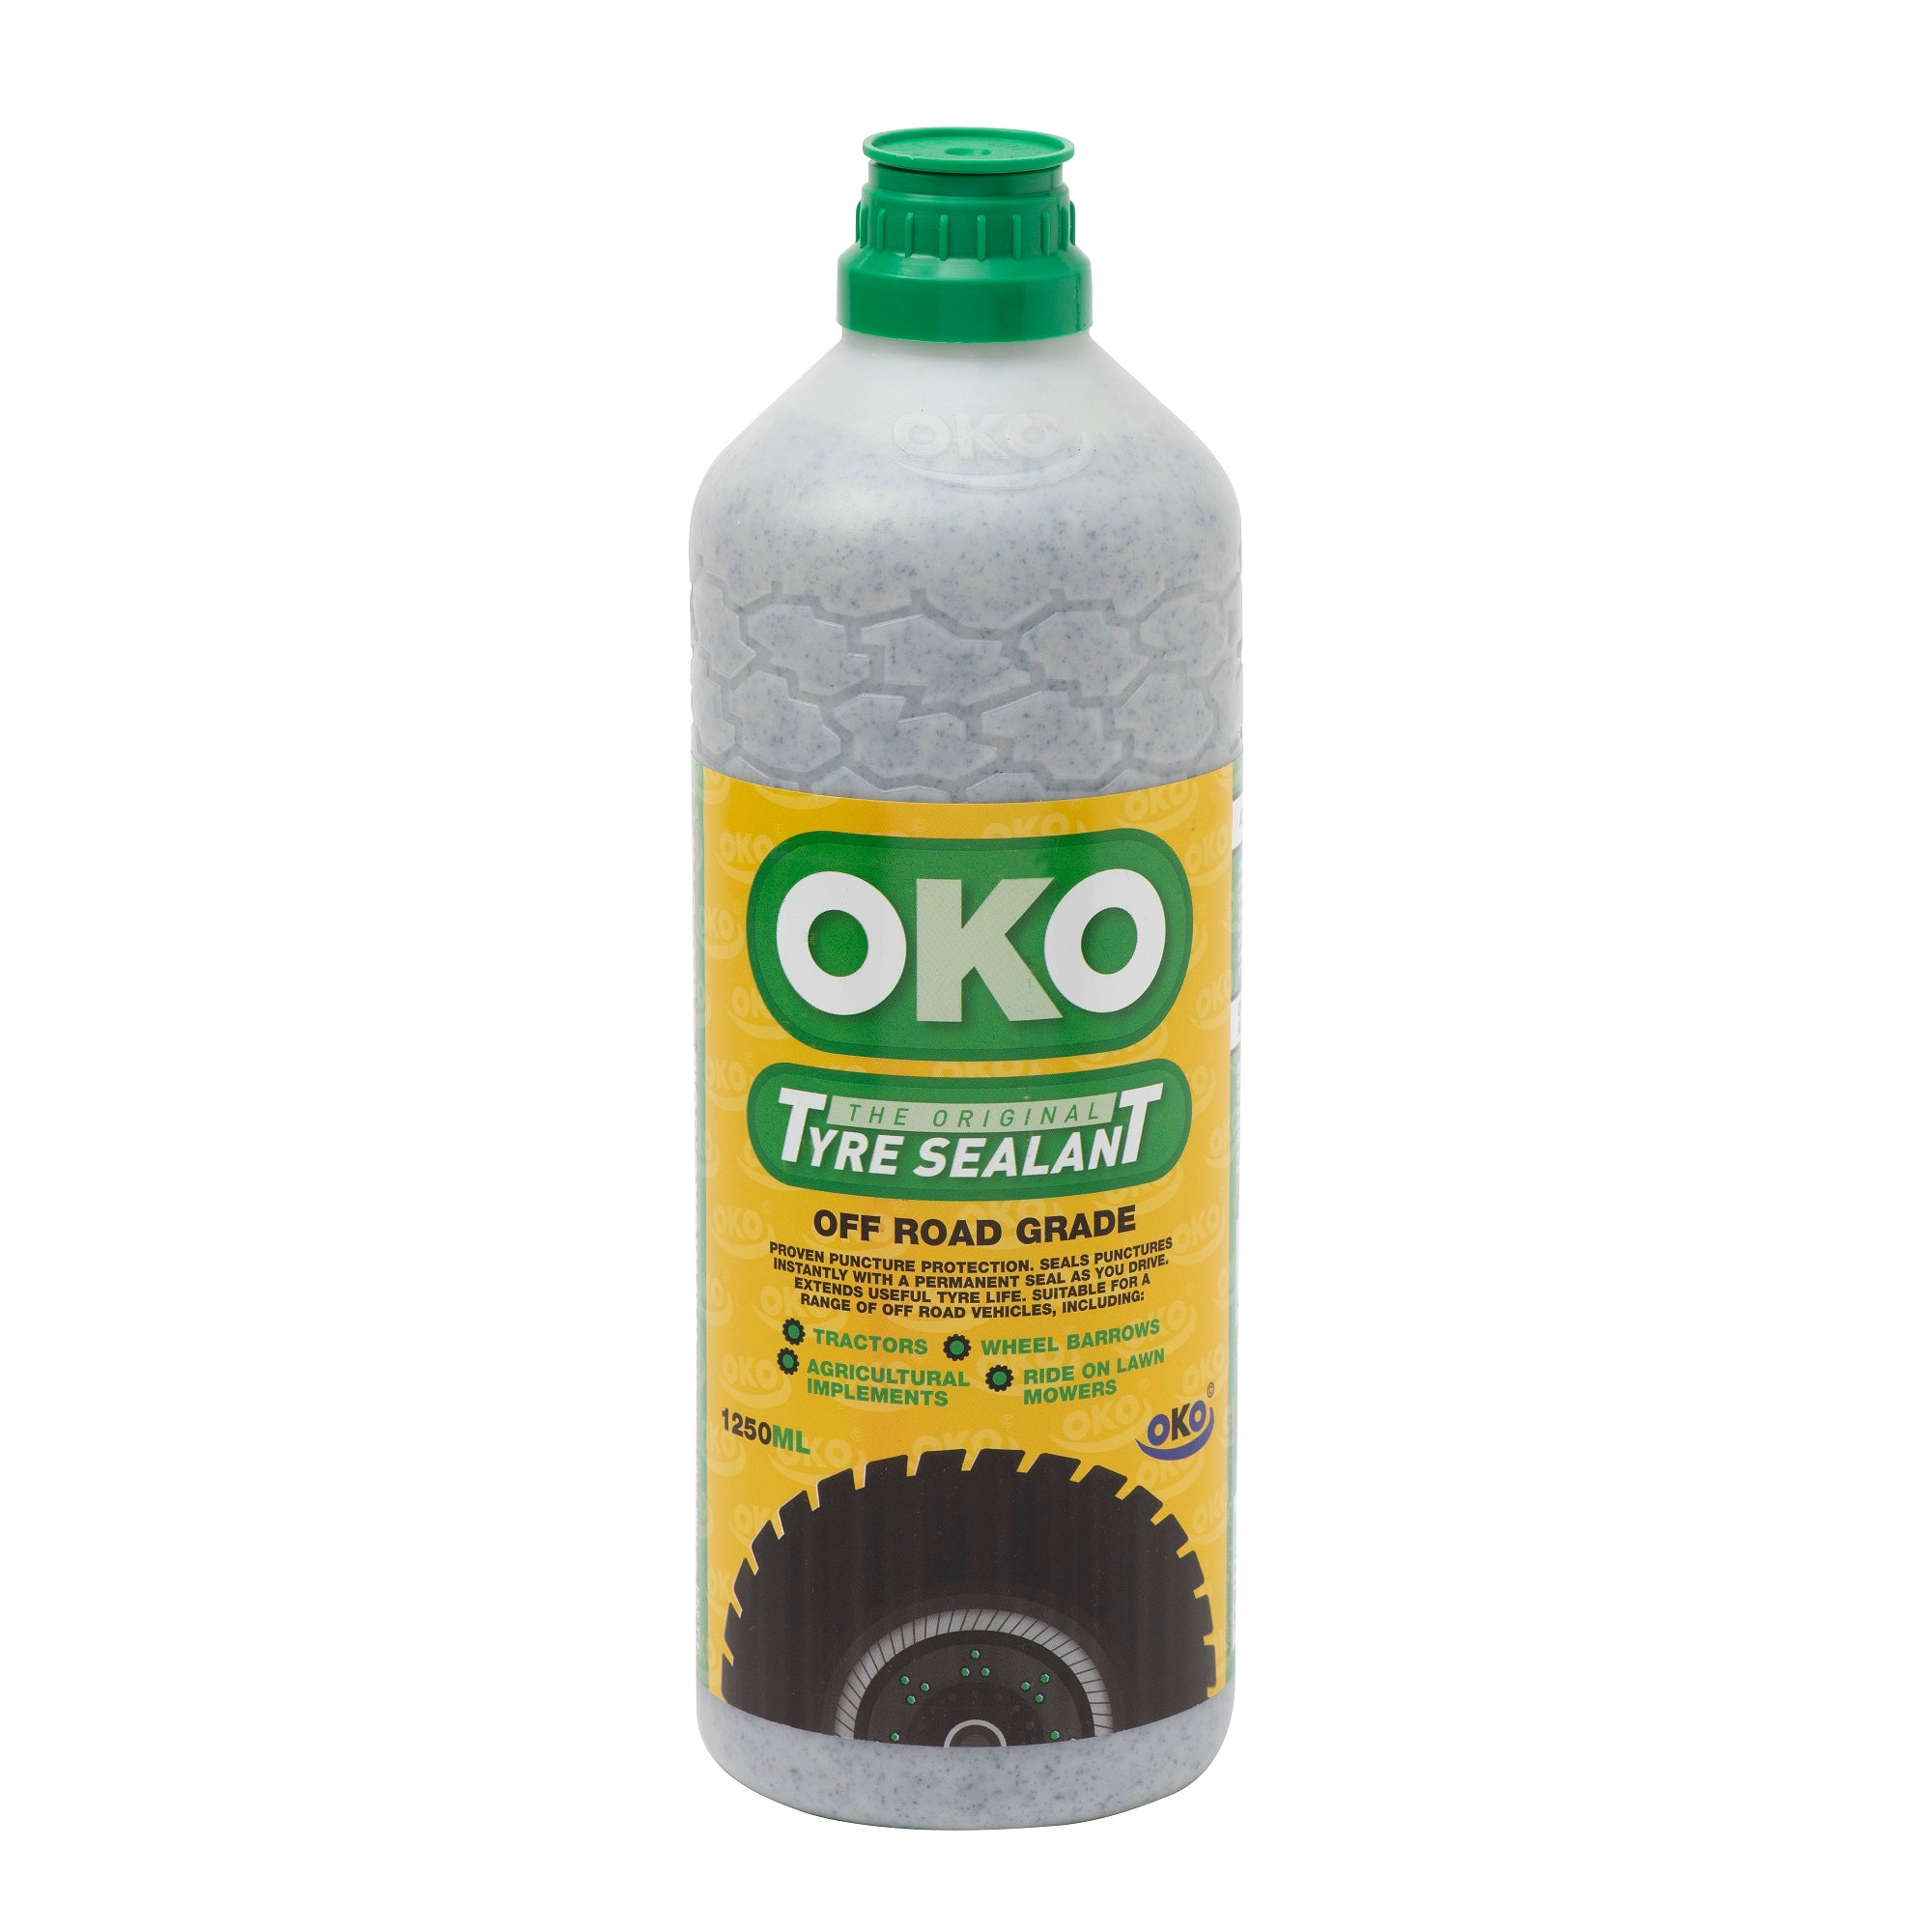 OKO Puncture-Free Off-Road Tyre Sealant 1250ml bottle